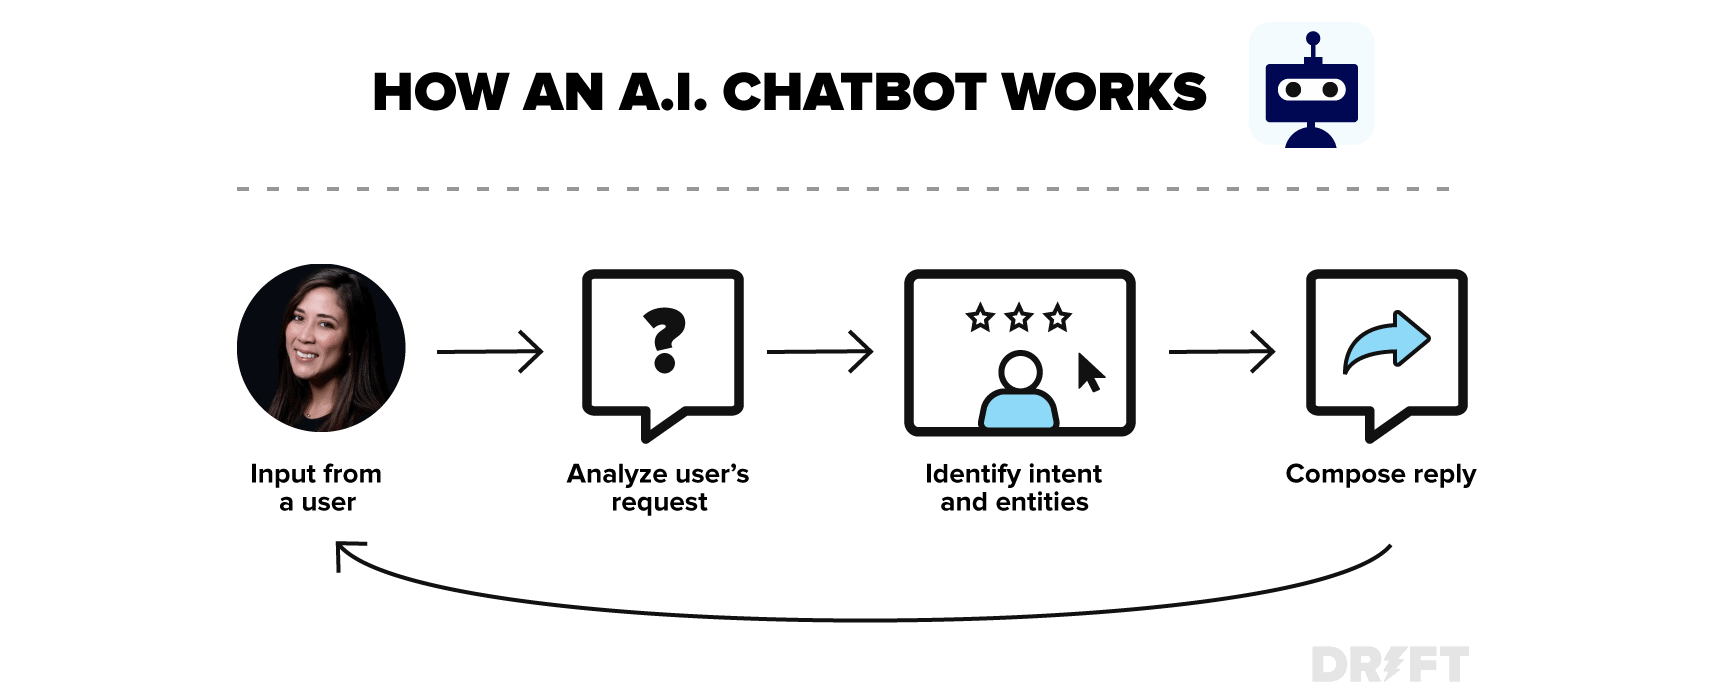 Chatbots - The Beginners Guide to Chatbot Technology | Drift